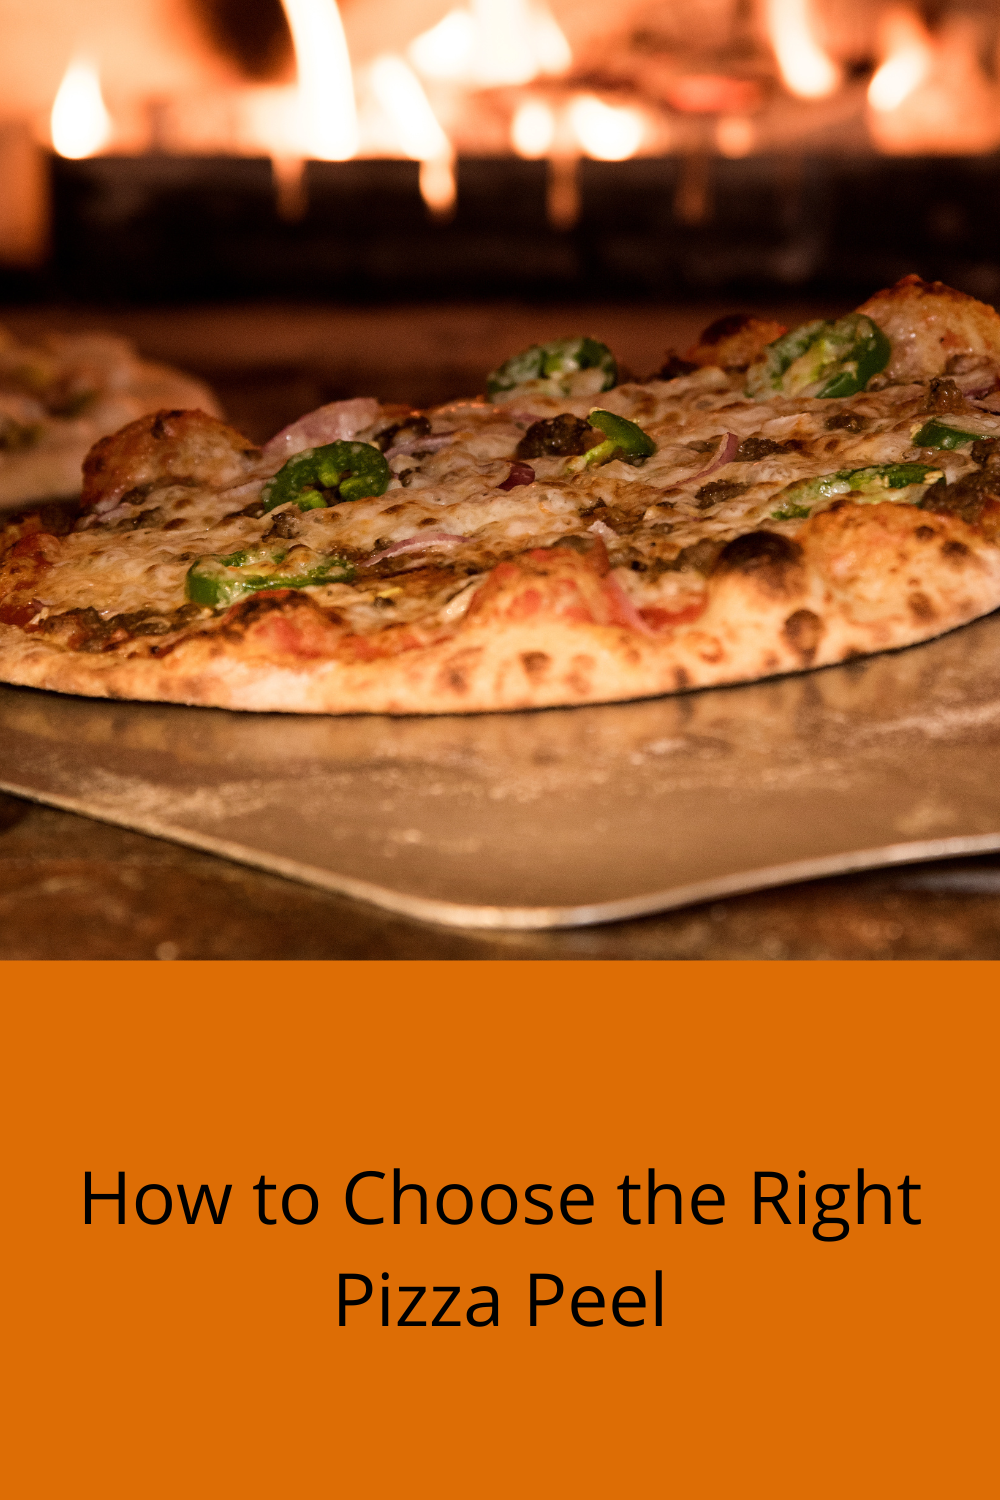 How to Choose the Right Pizza Peel